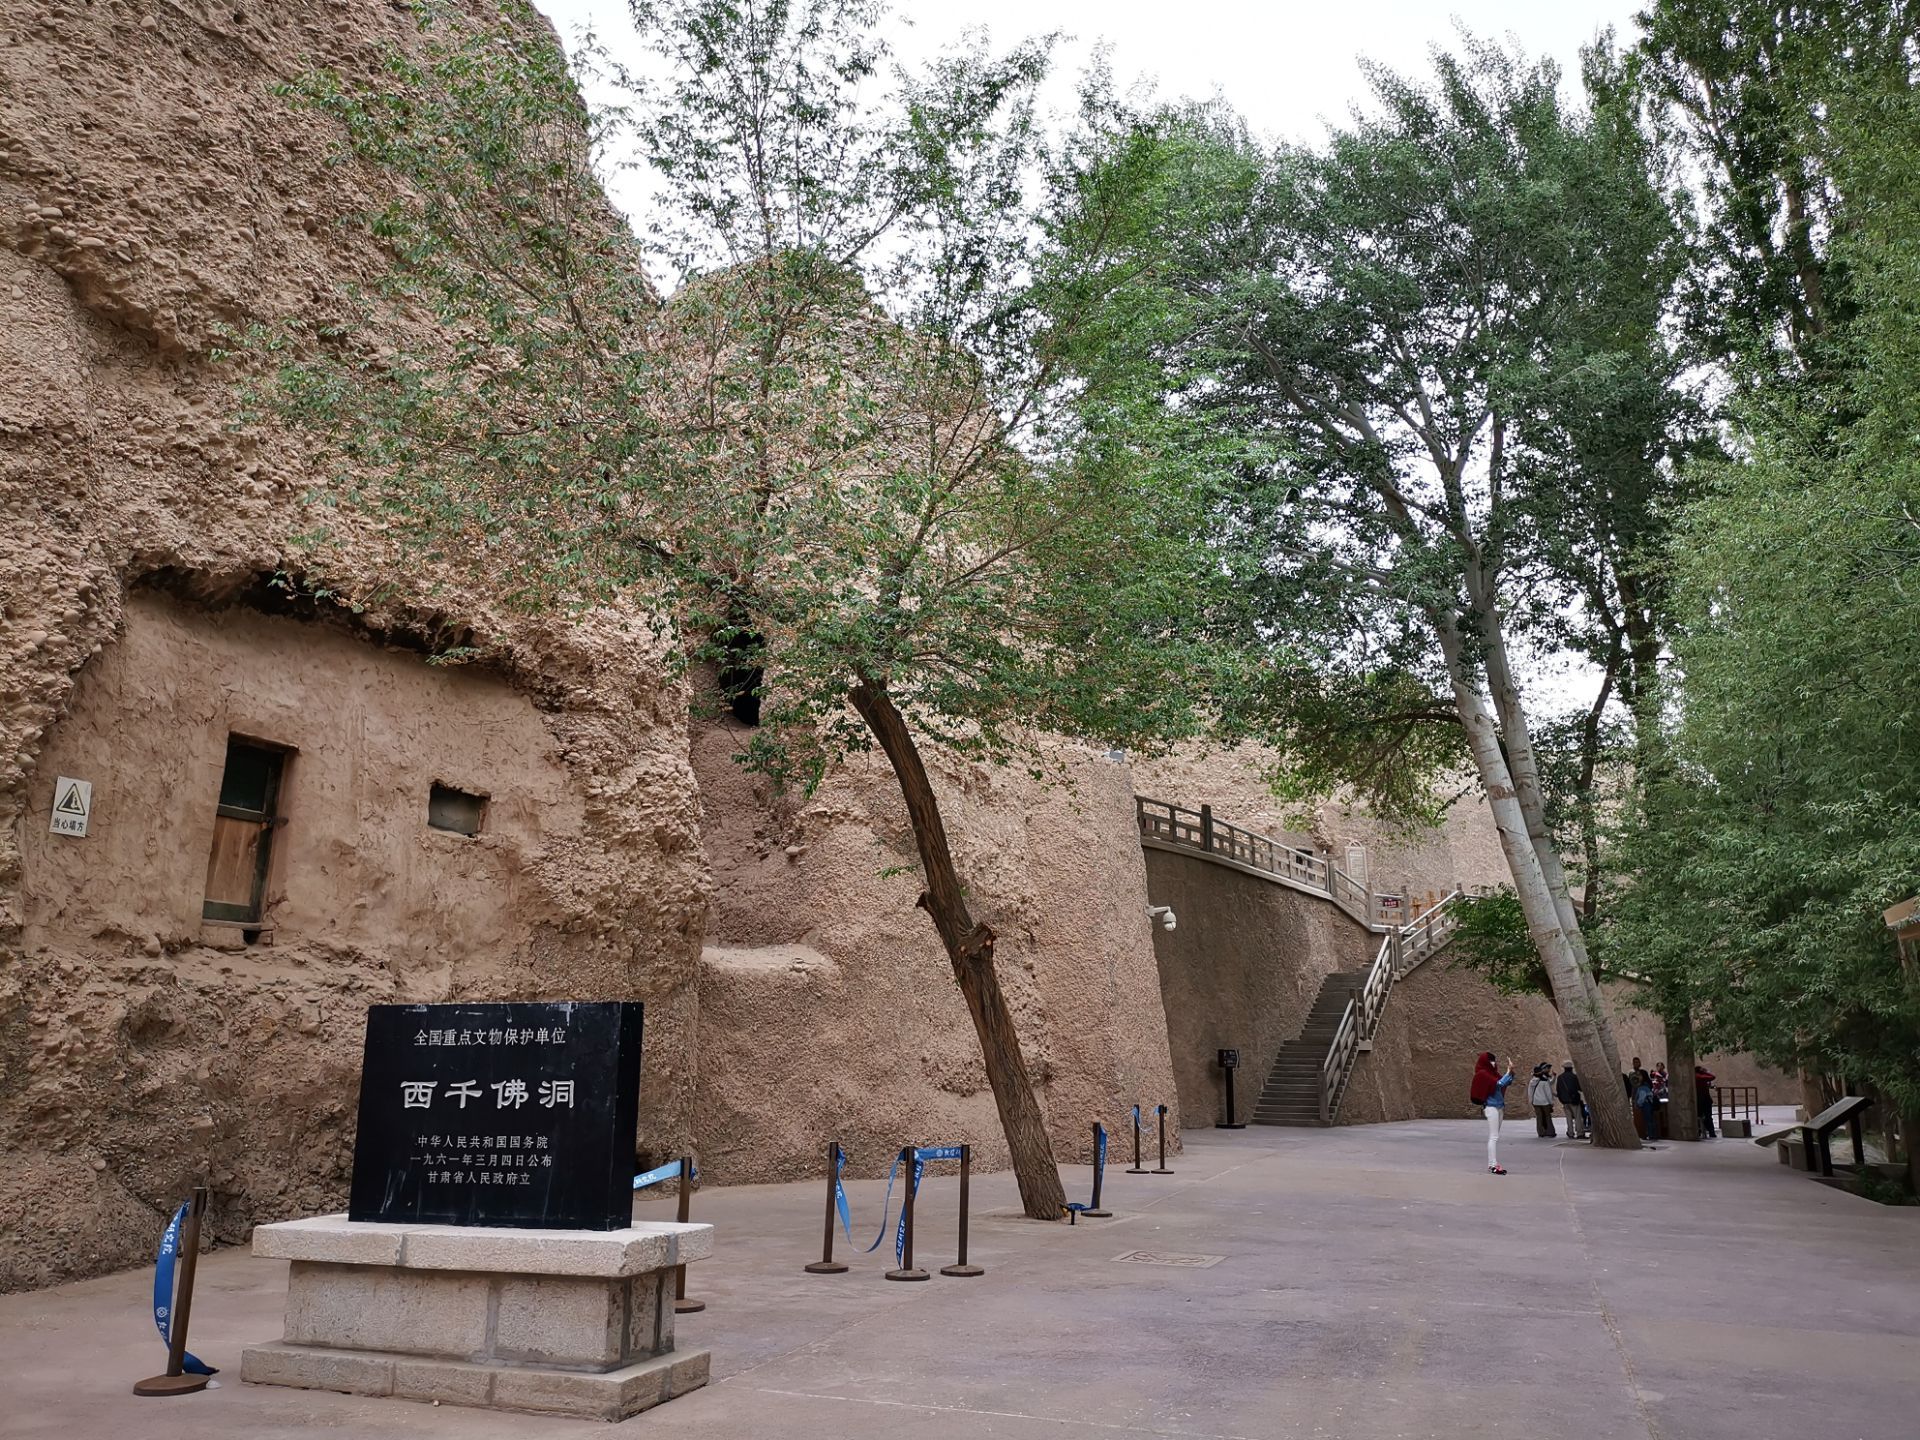 The West Thousand Buddha Cave